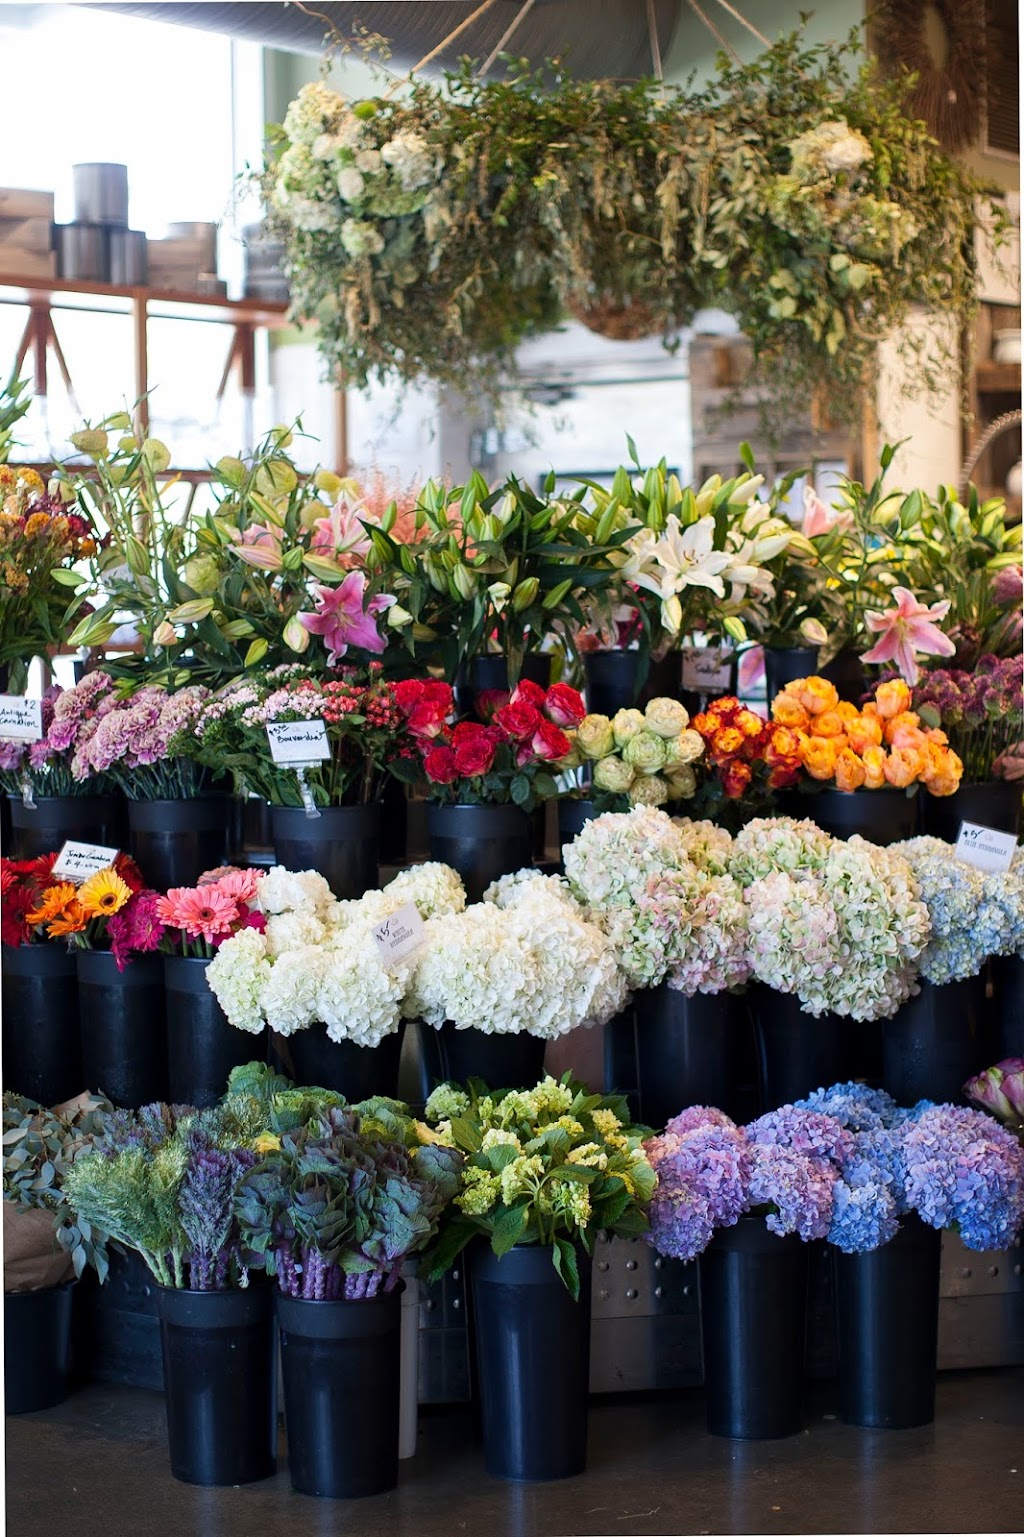 Argyle Floral Home and Garden | 346 W Lancaster Ave, Haverford, PA 19041 | Phone: (484) 422-8553